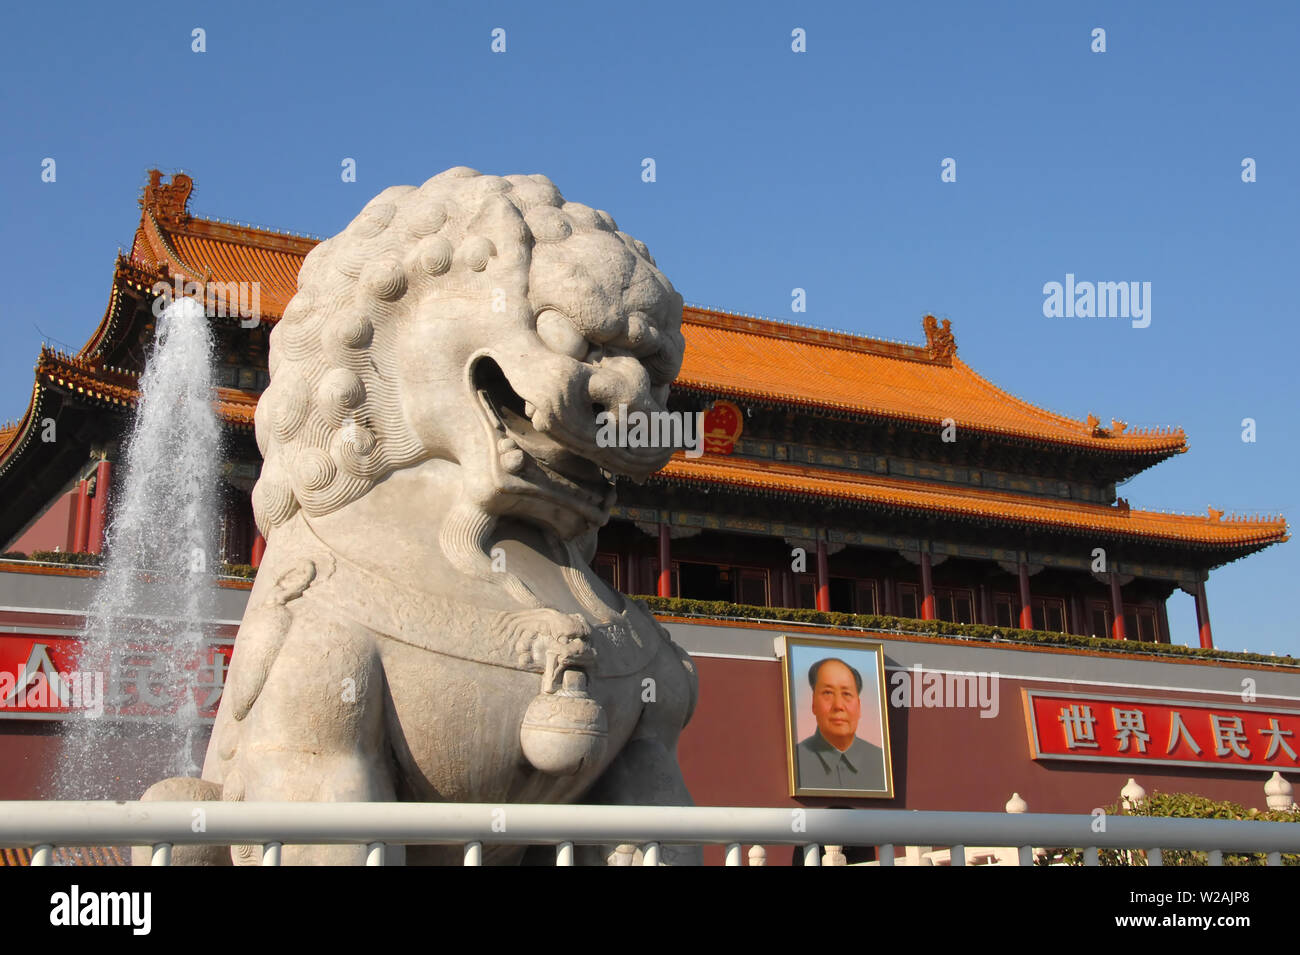 Gate of Heavenly Peace in Tiananmen Square, Beijing, China. Tiananmen Square is a famous landmark in Beijing. Tiananmen leads to the Forbidden City. Stock Photo